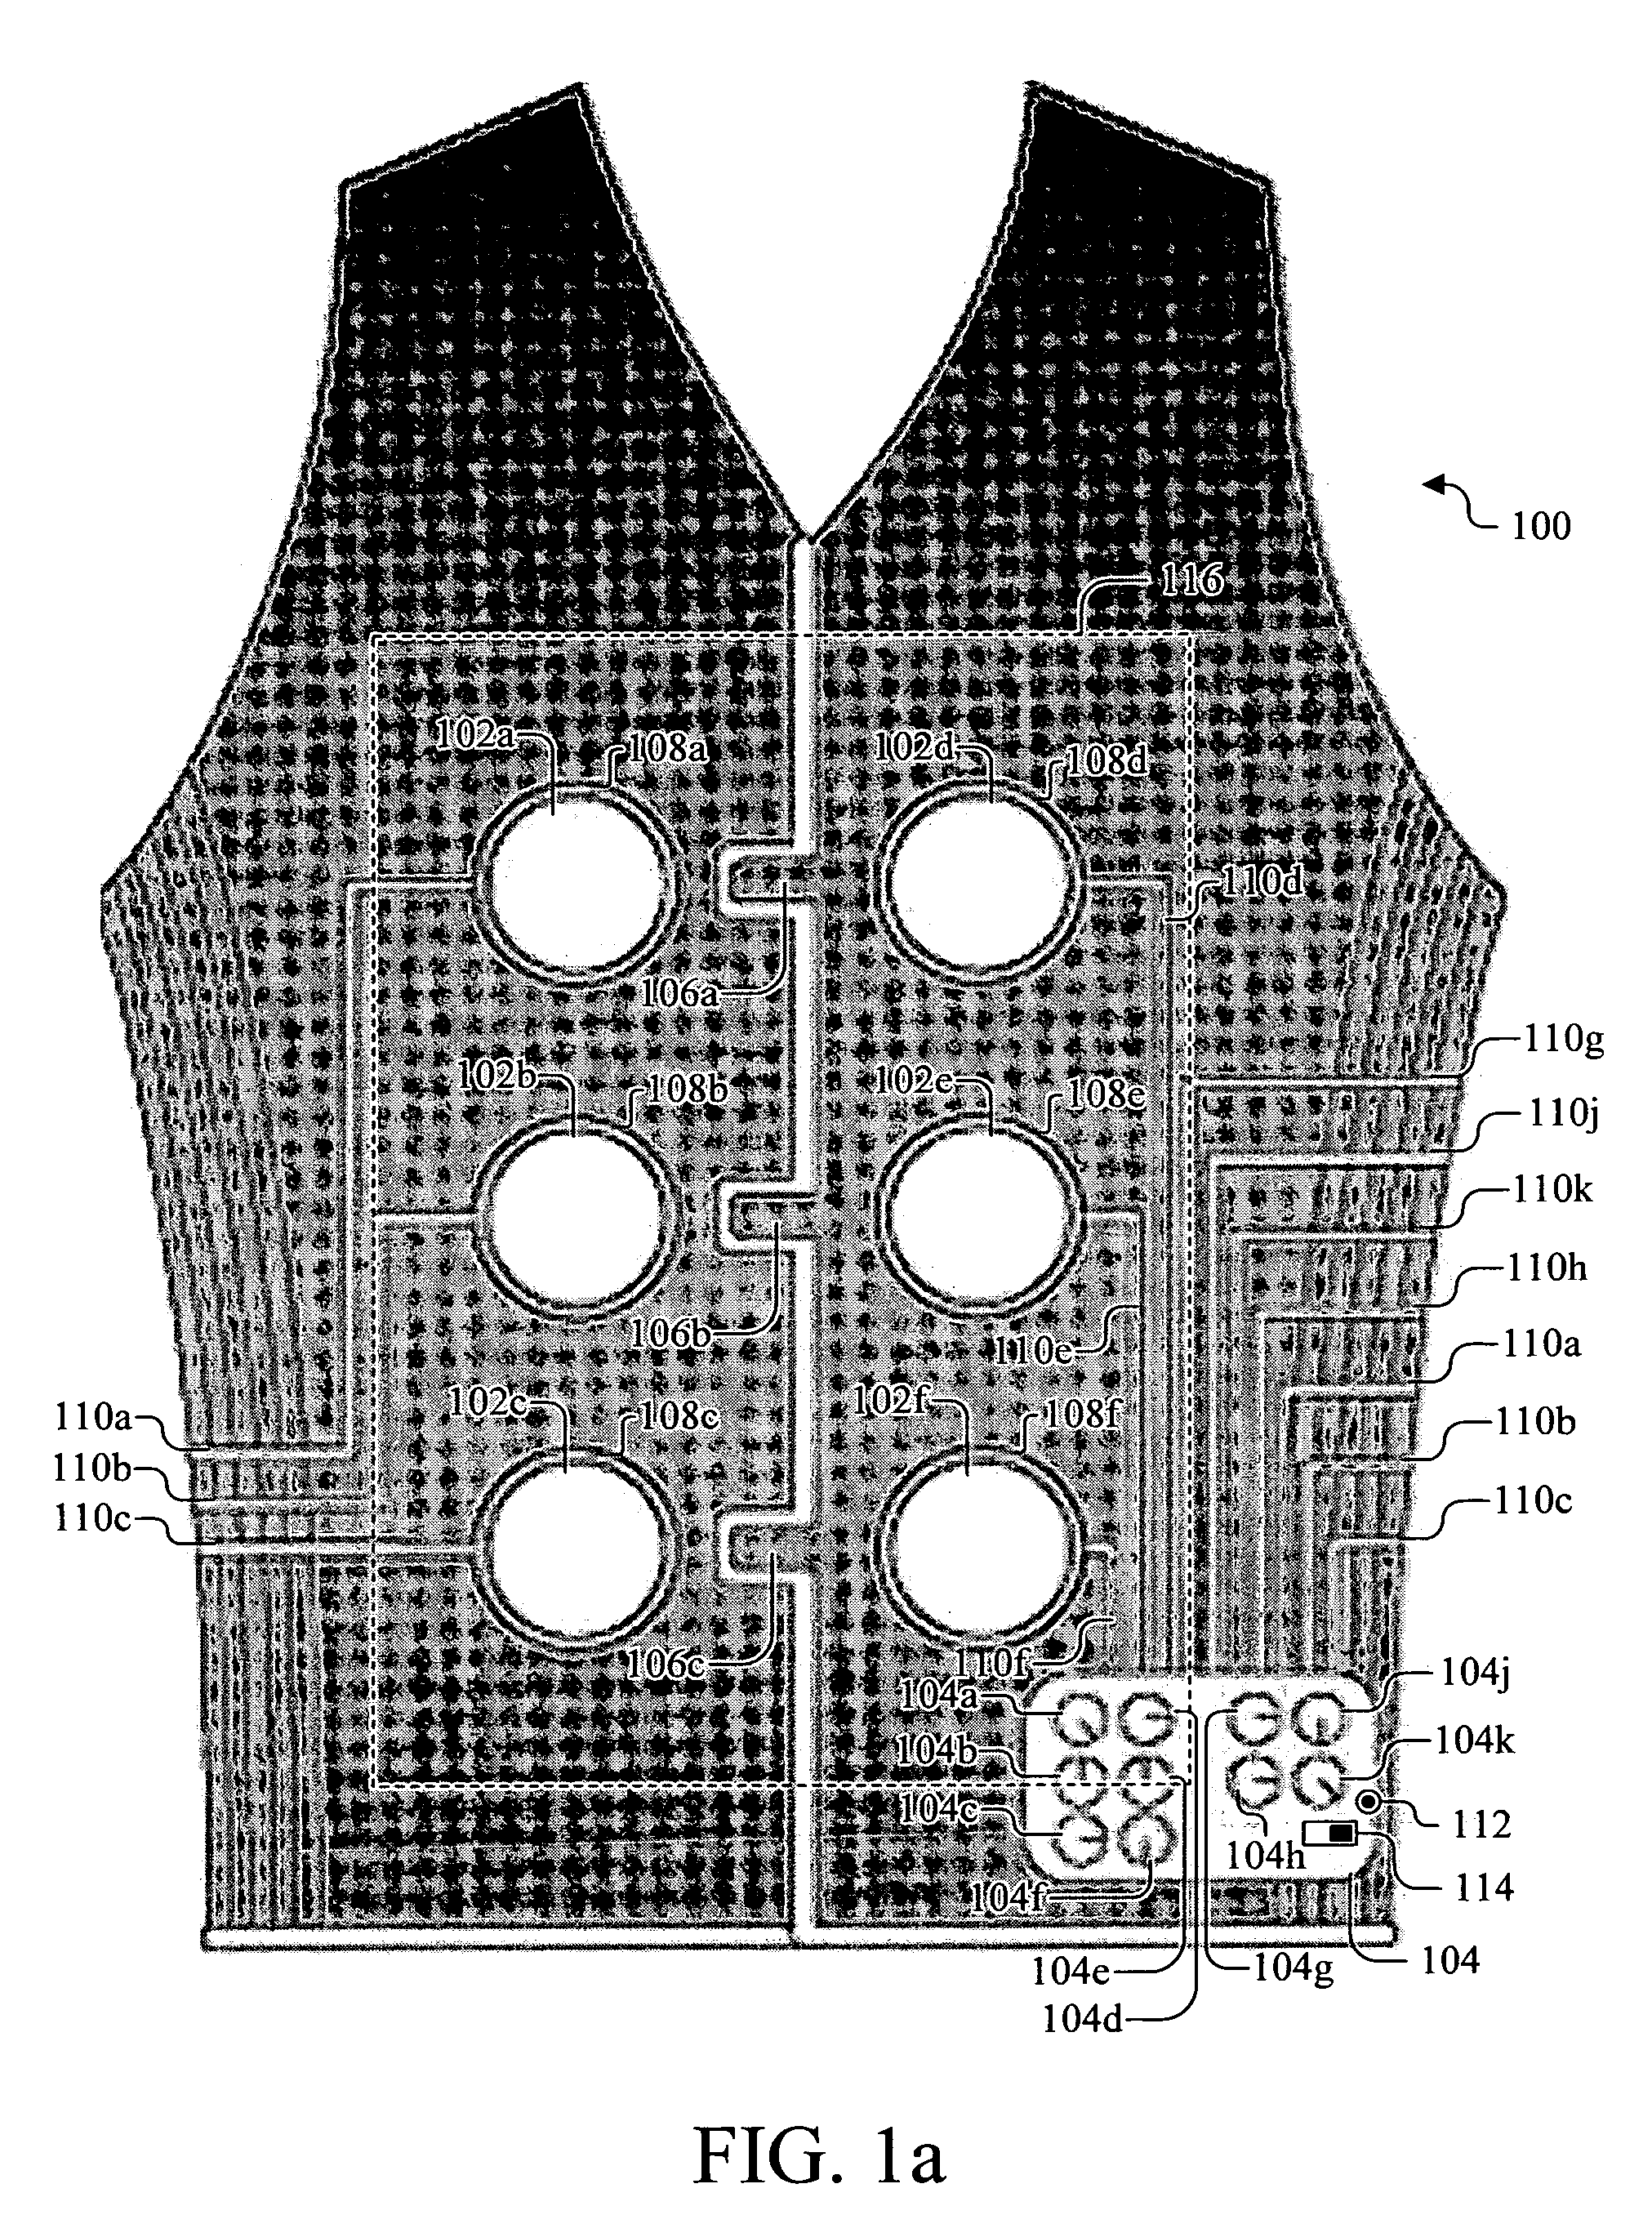 Electrode vest for electrical stimulation of the abdomen and back